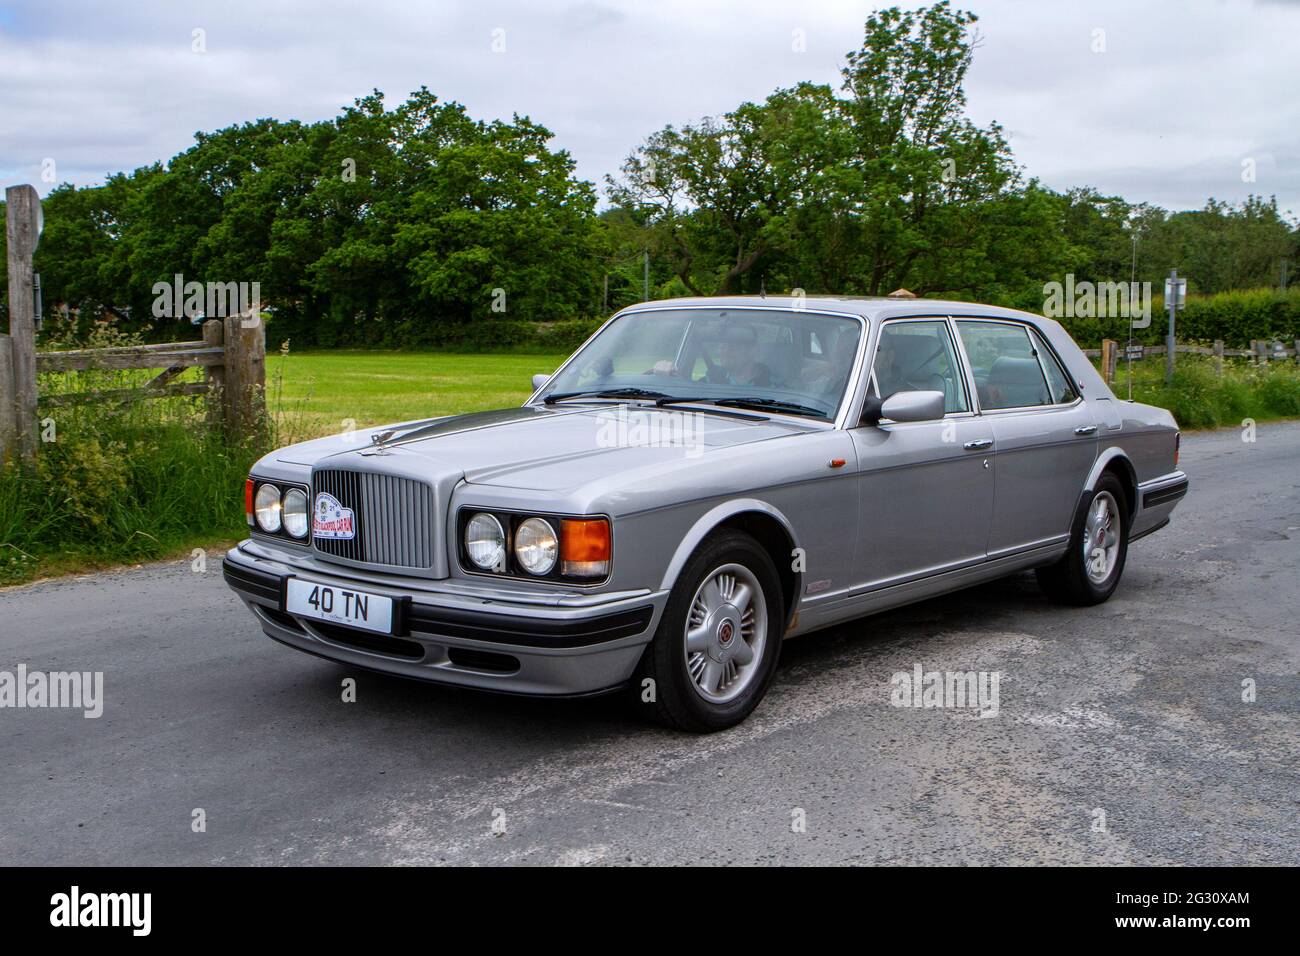 1997 70s silver Bentley TBO 6750cc at the 58th Annual Manchester to Blackpool Vintage & Classic Car Run The event is a ‘Touring Assembly’ Stock Photo